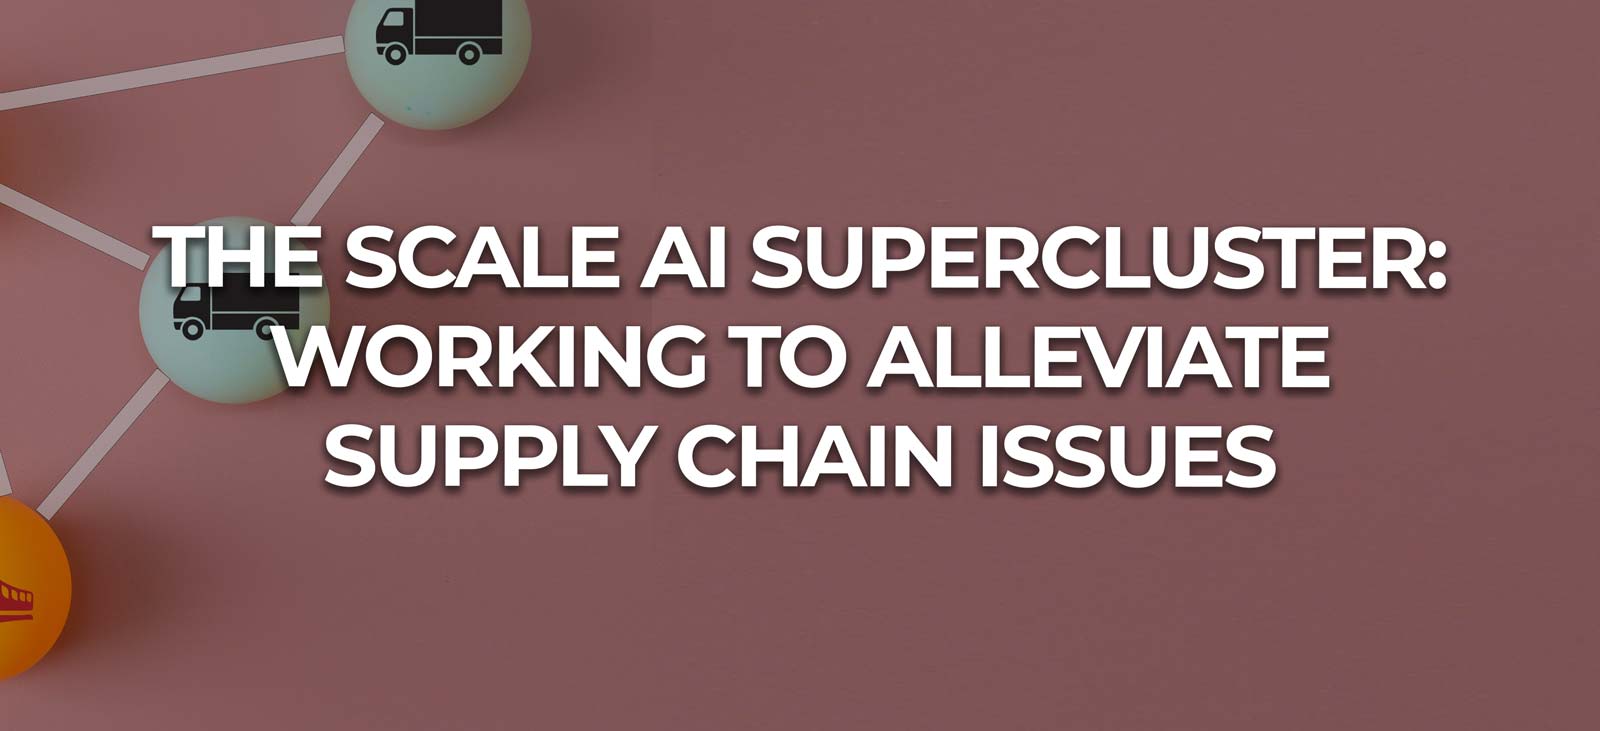 How Will the Scale AI Supercluster Alleviate Supply Chain Problems? - image